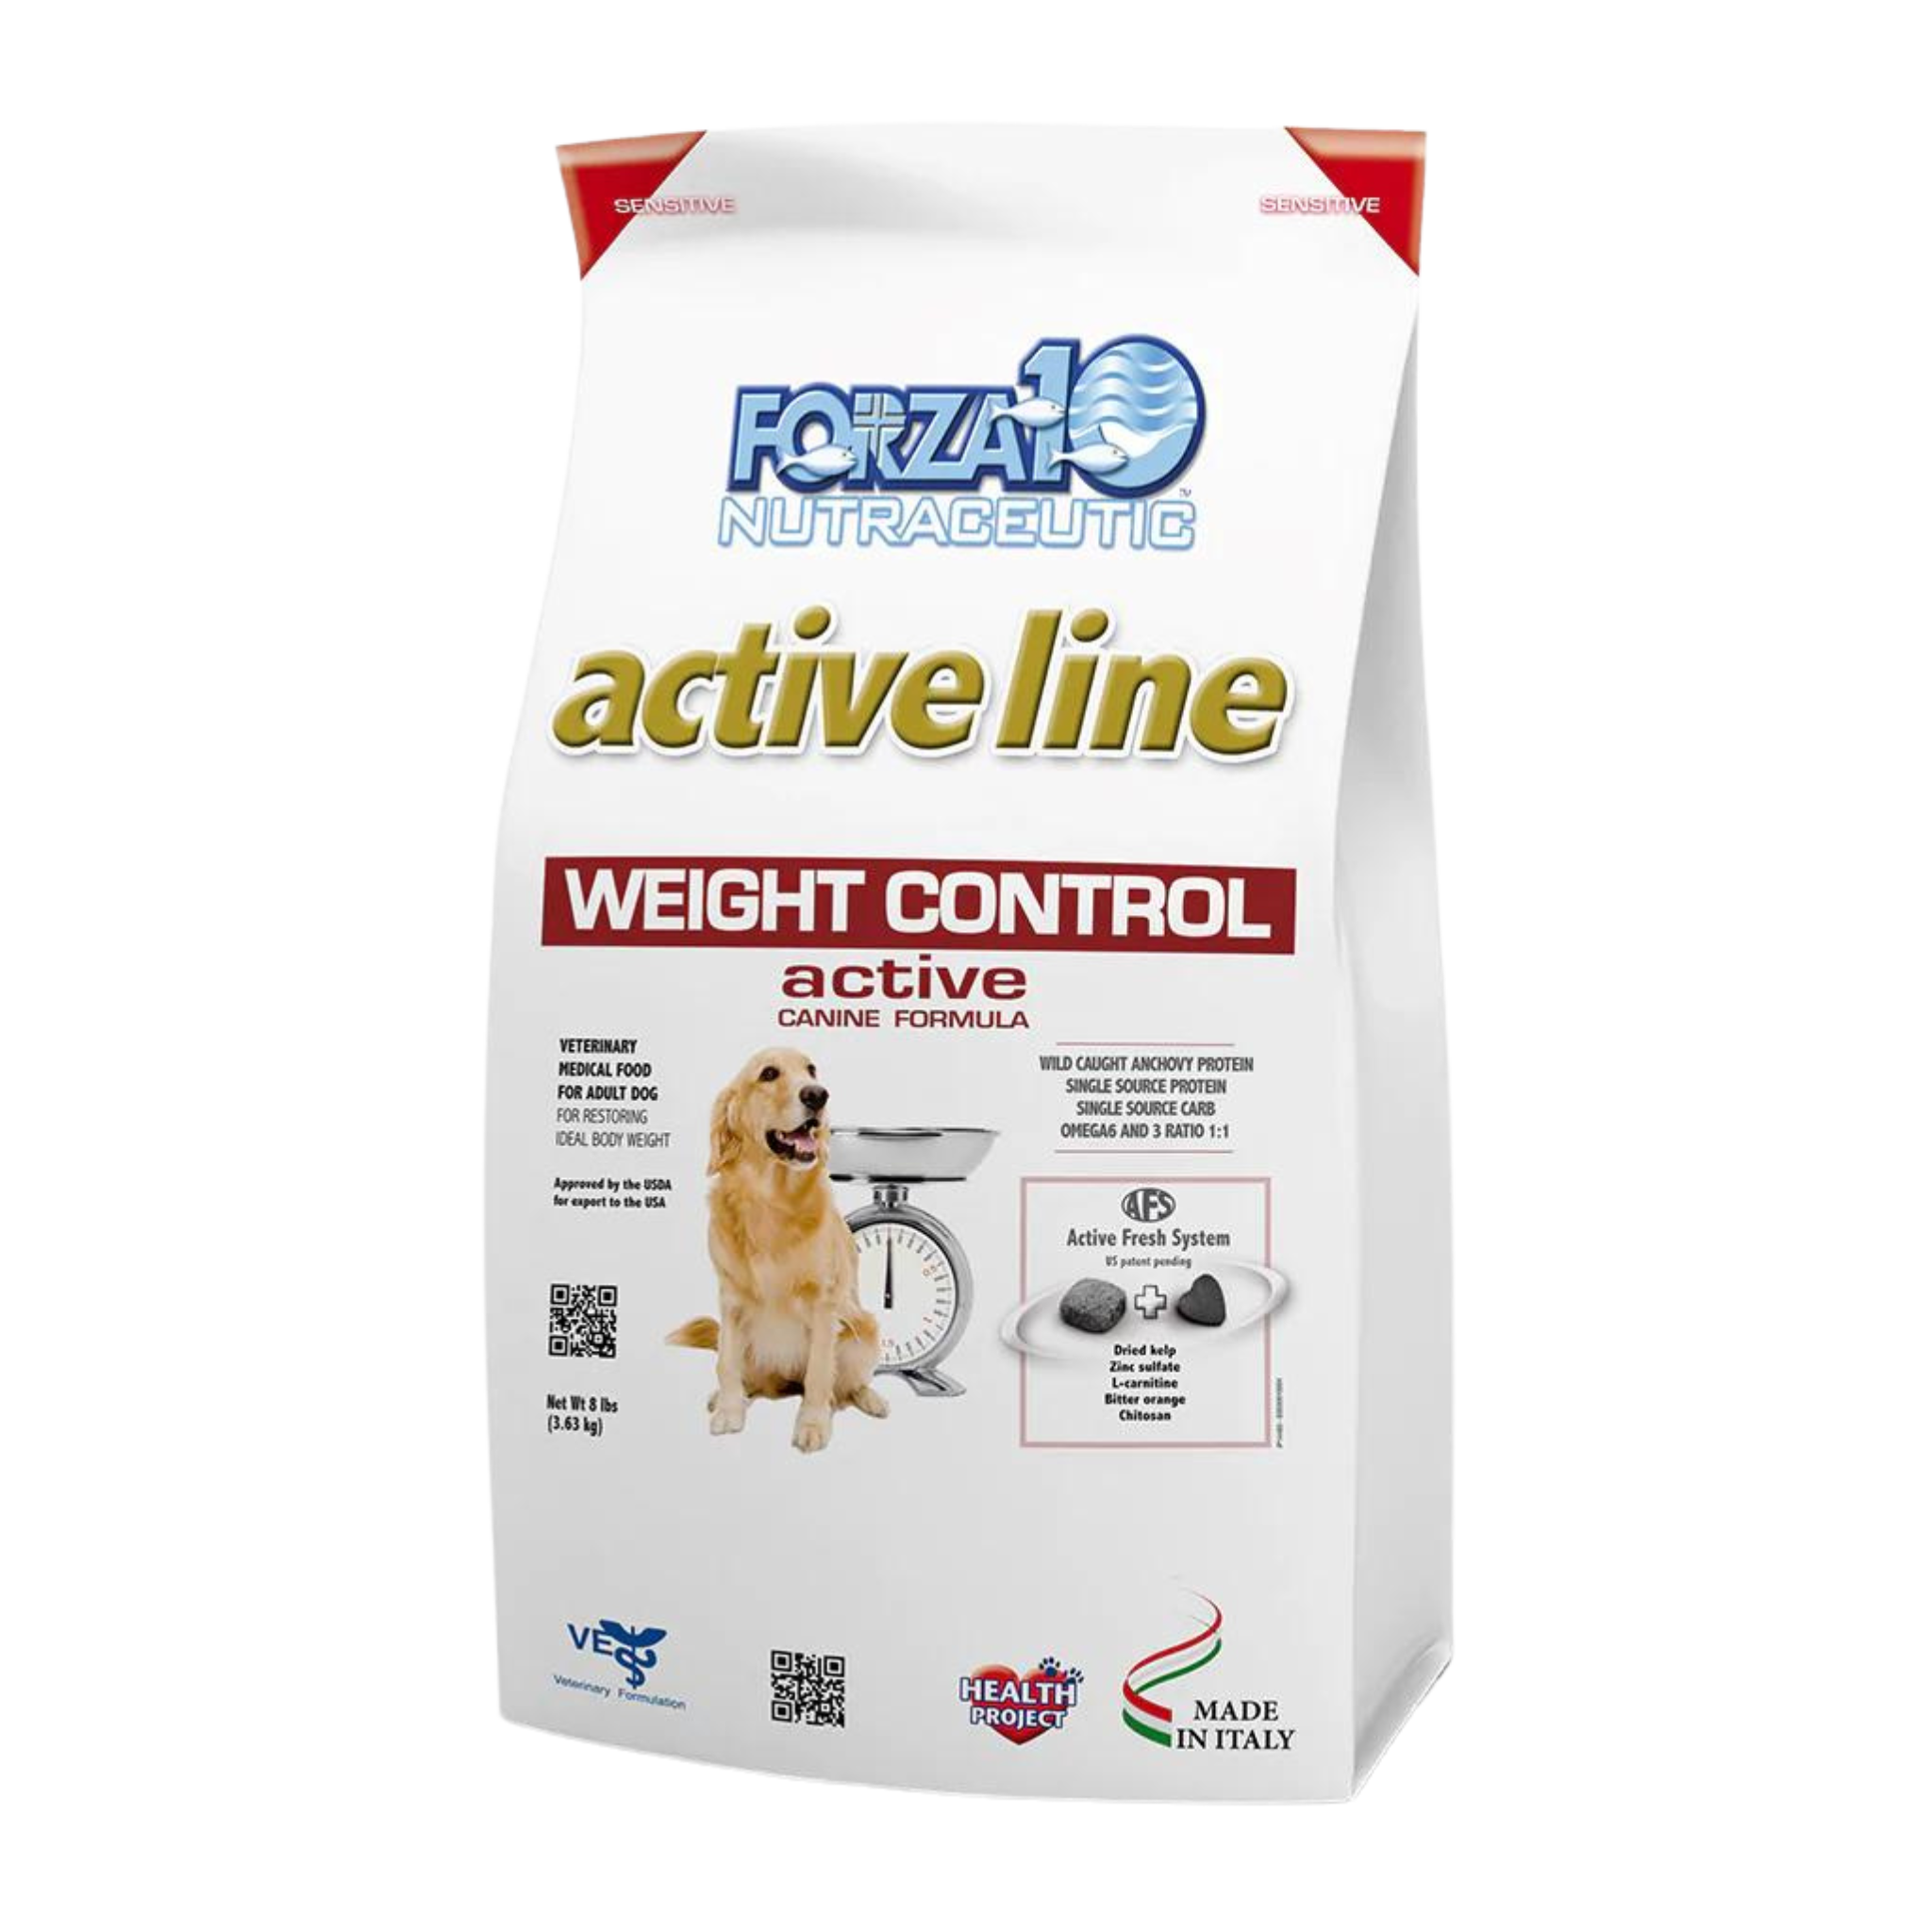 Forza10 Nutraceutic Active Line Weight Control Diet Dry Dog Food bag 8 lbs - Mutts & Co.